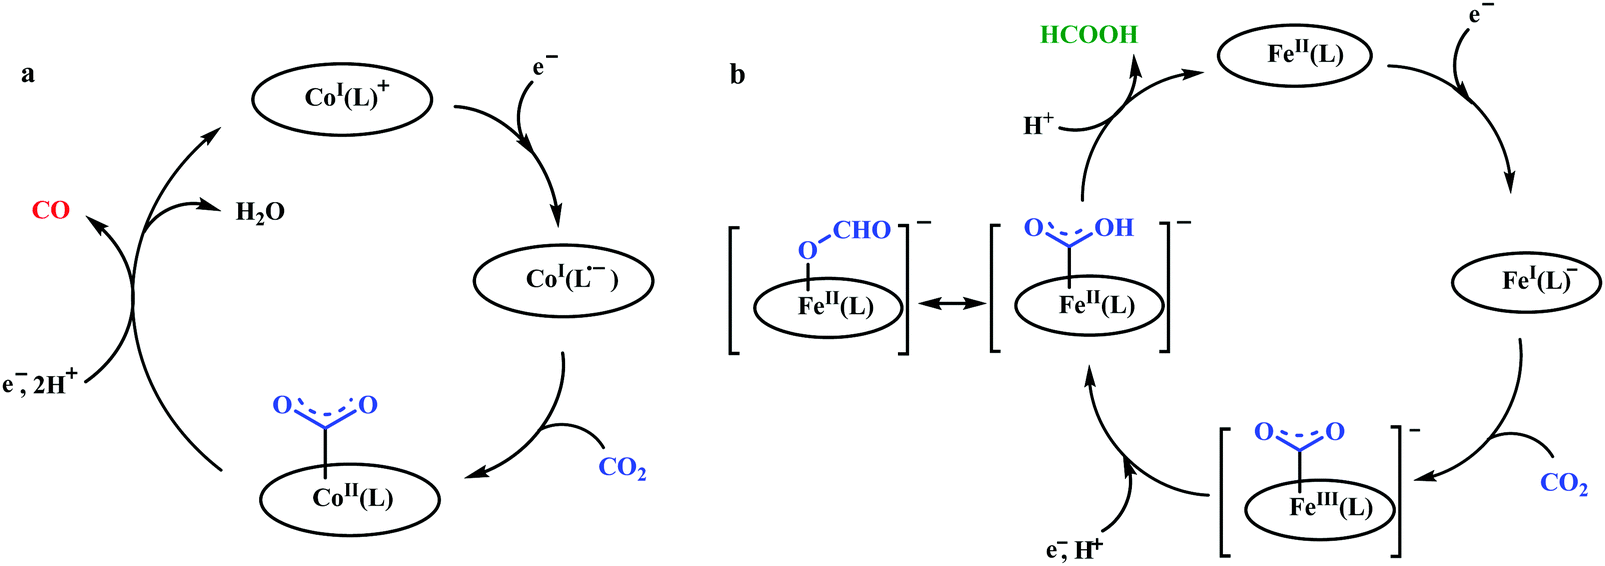 Biochemical And Artificial Pathways For The Reduction Of Carbon Dioxide Nitrite And The Competing Proton Reduction Effect Of 2nd Sphere Interactions In Catalysis Chemical Society Reviews Rsc Publishing